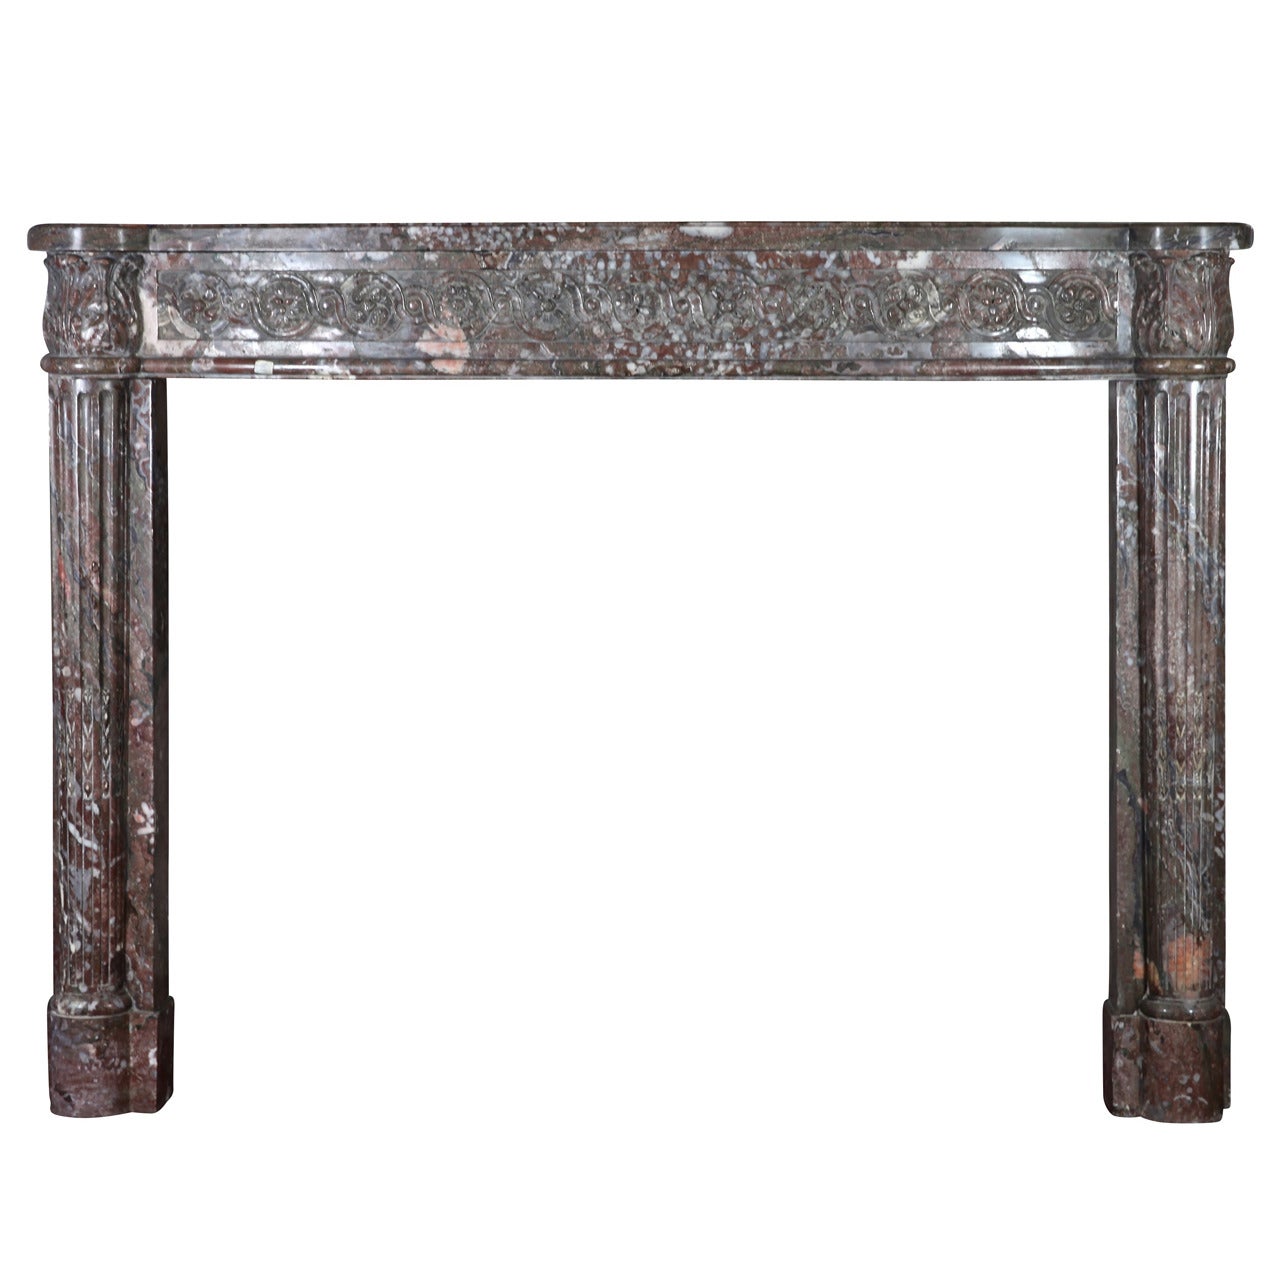 18th Century Fine Antique French Fireplace Mantel from the Louis XVI Period